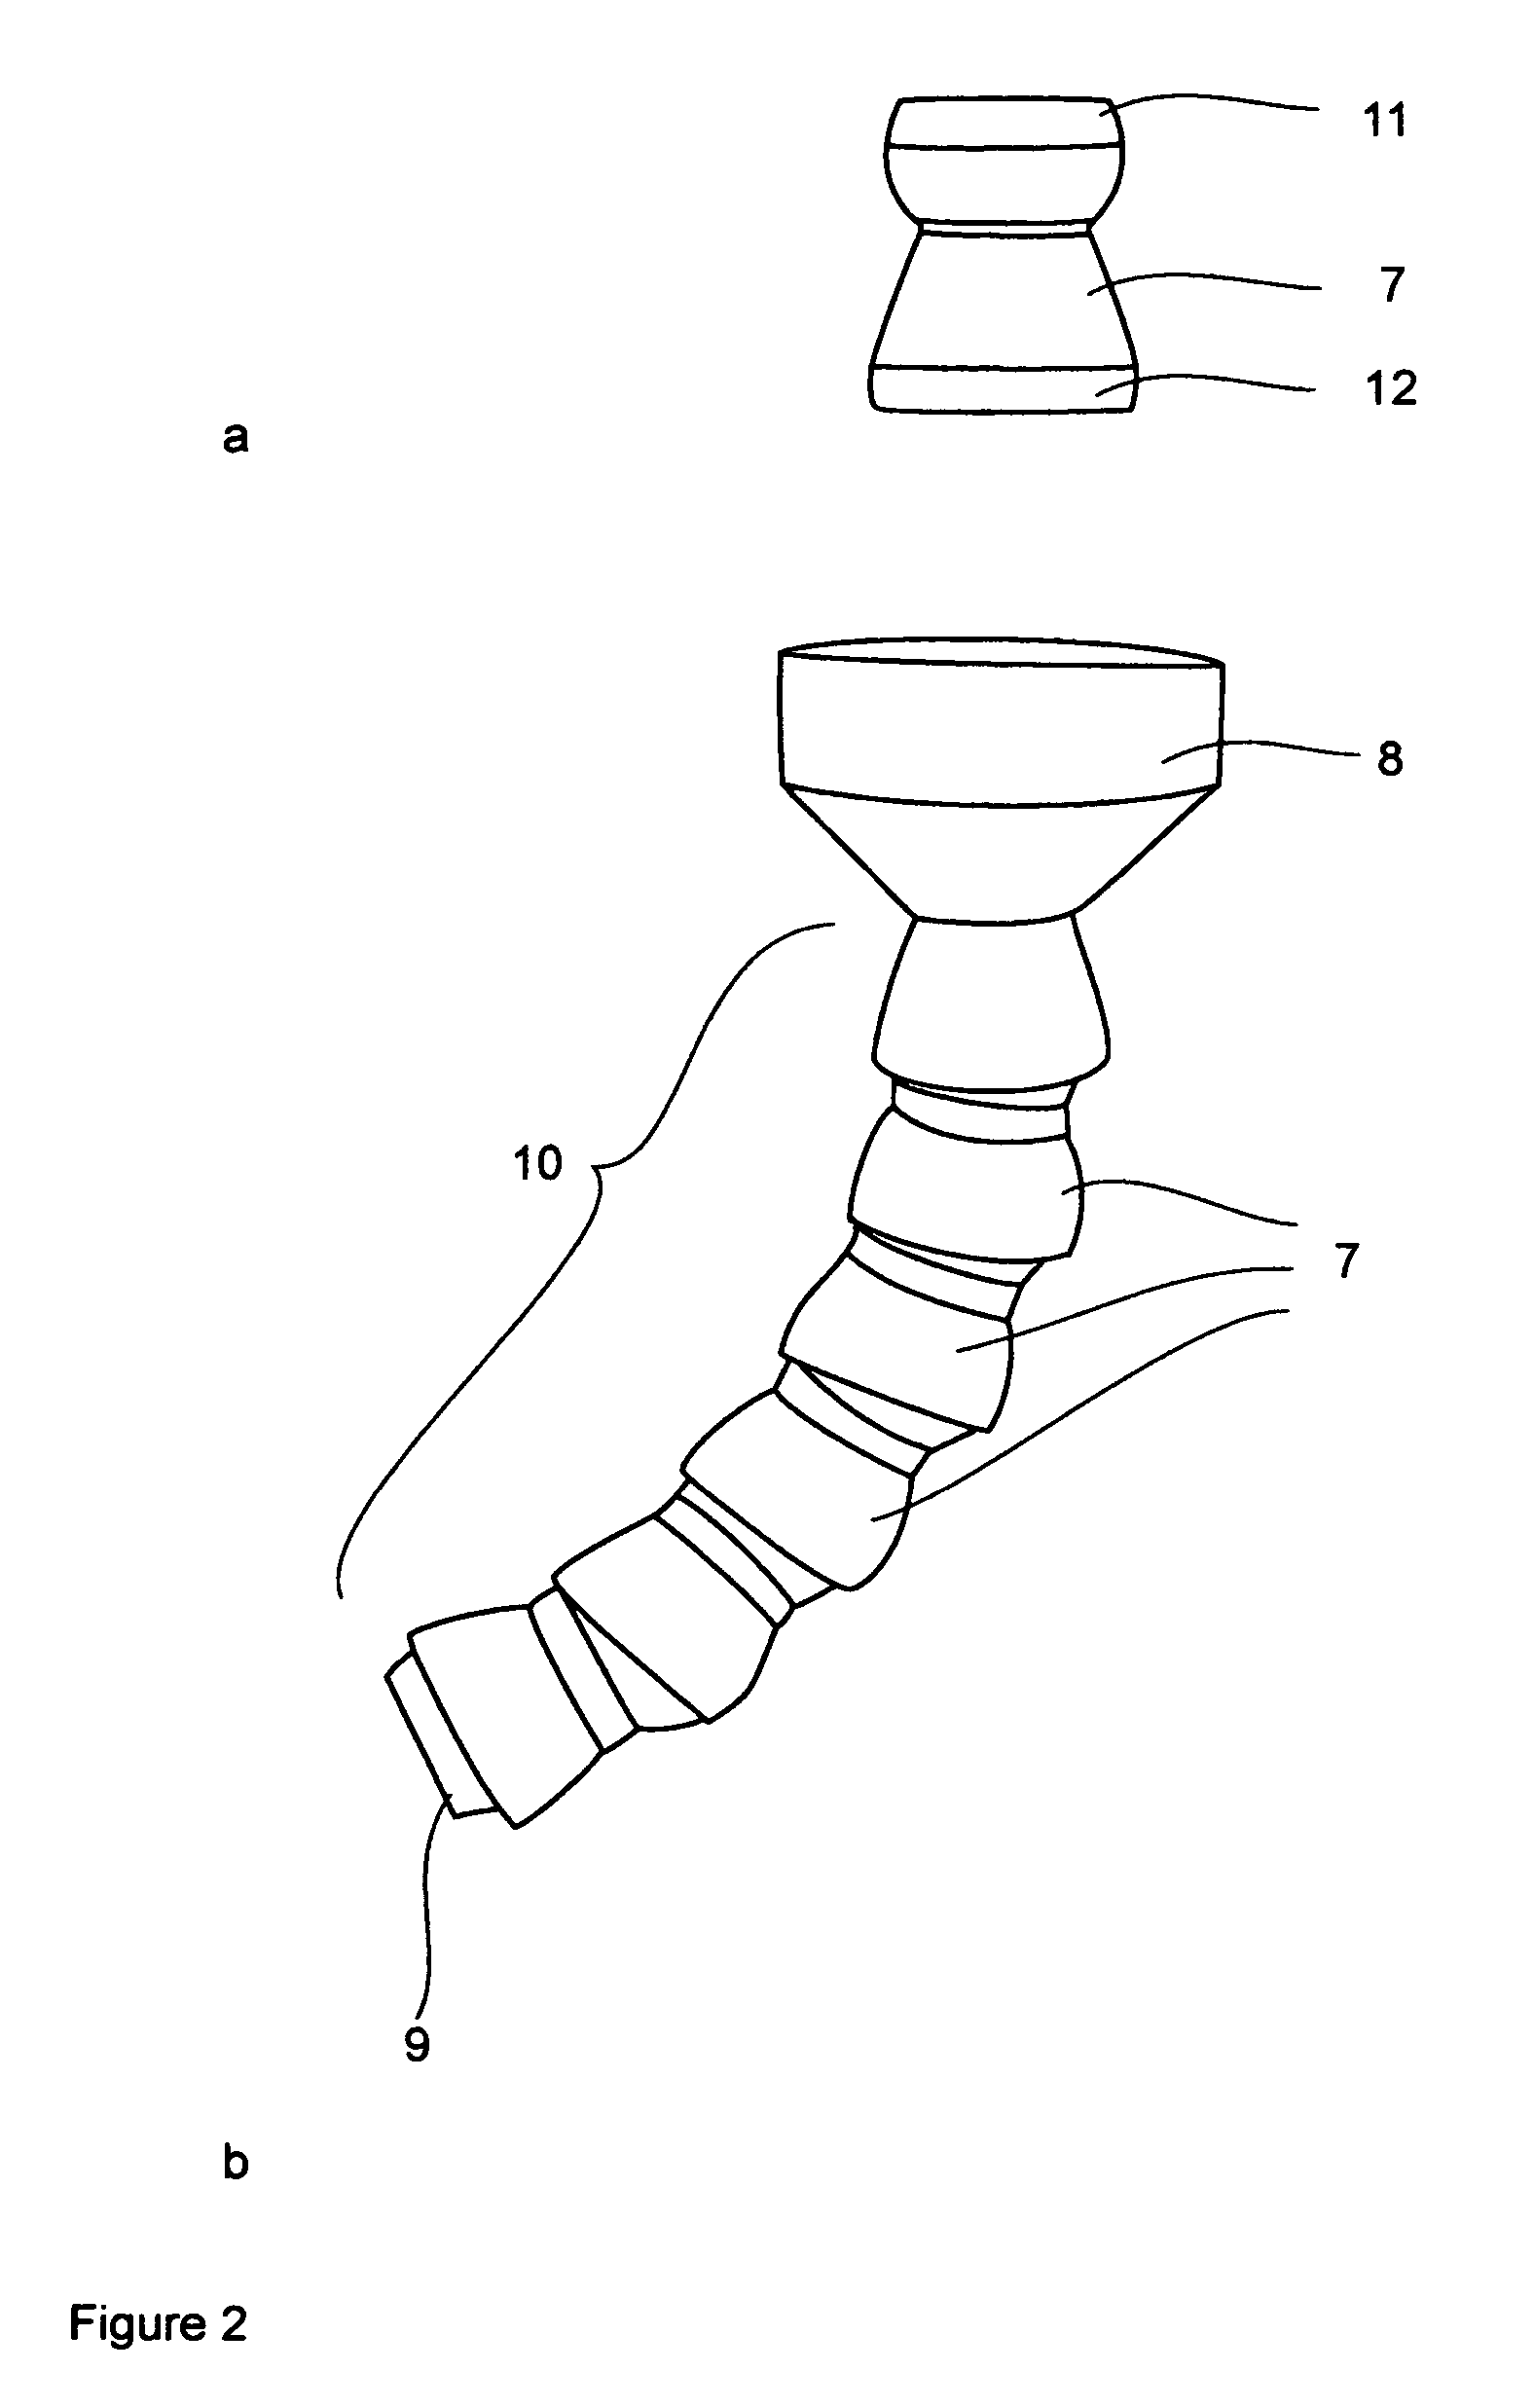 Illumination device and method for medical procedures